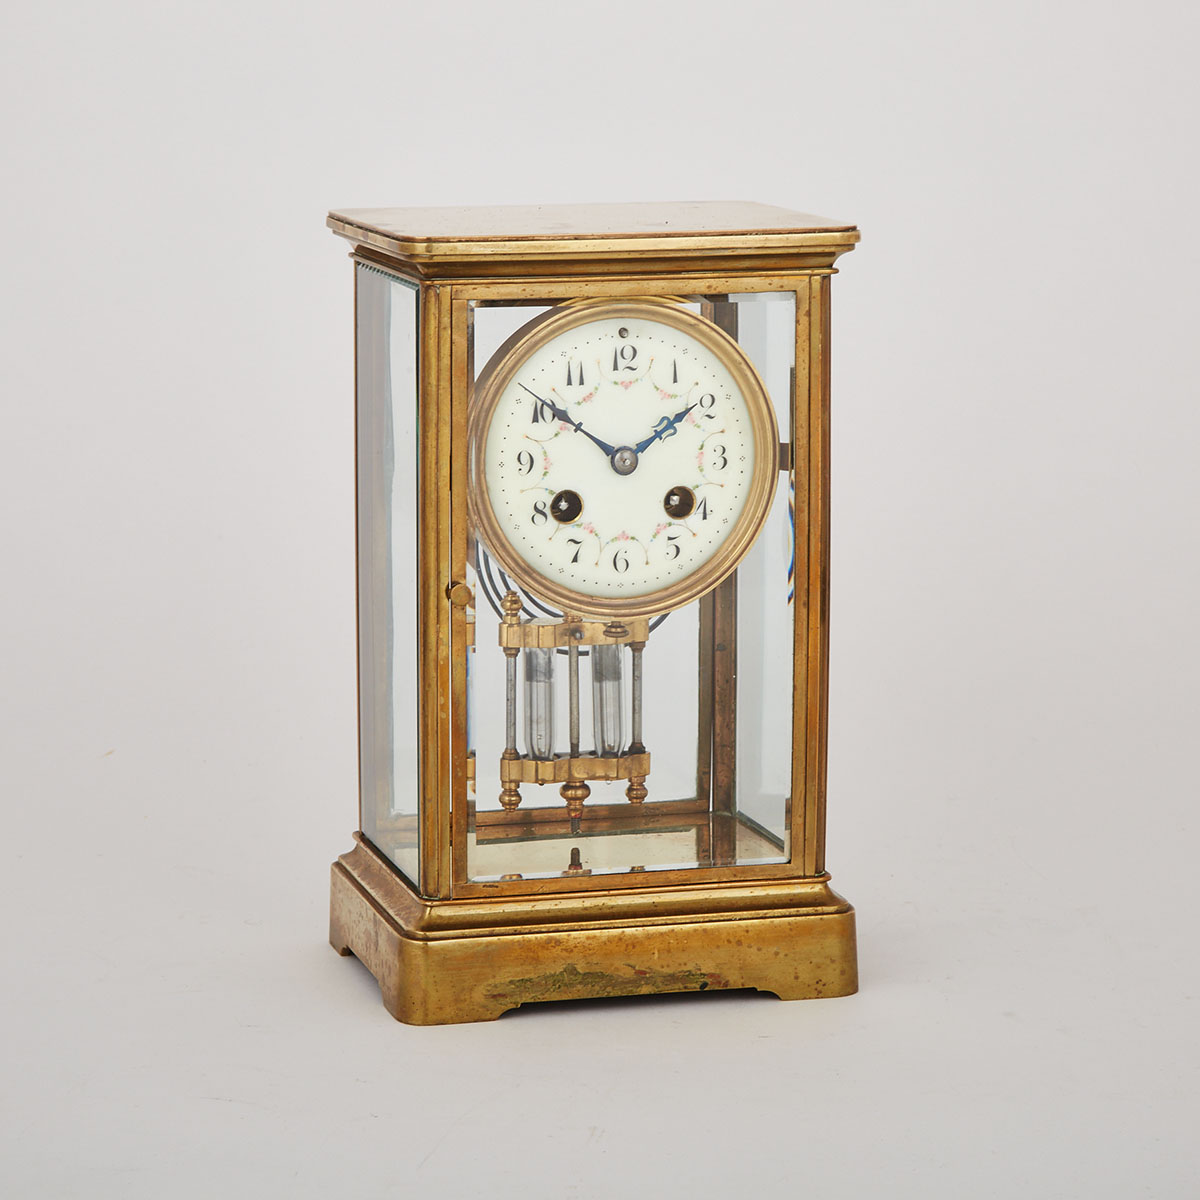 French Four Glass ‘Crystal Regulator’ Mantel Clock, early 20th century